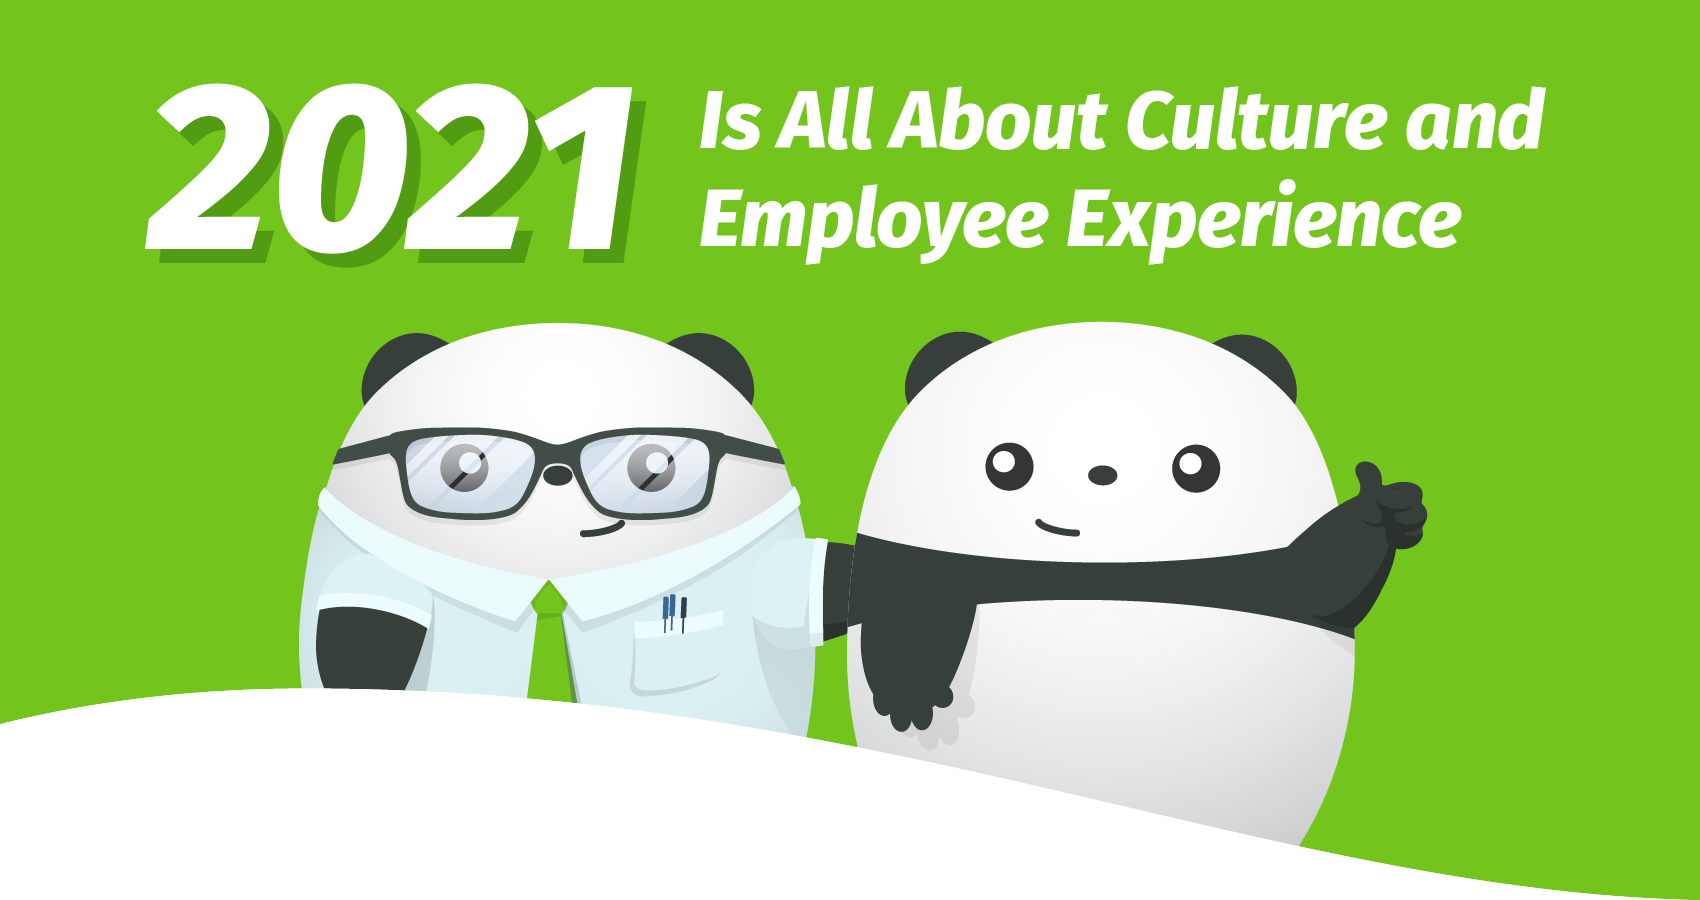 2021 Is All About Culture and Employee Experience